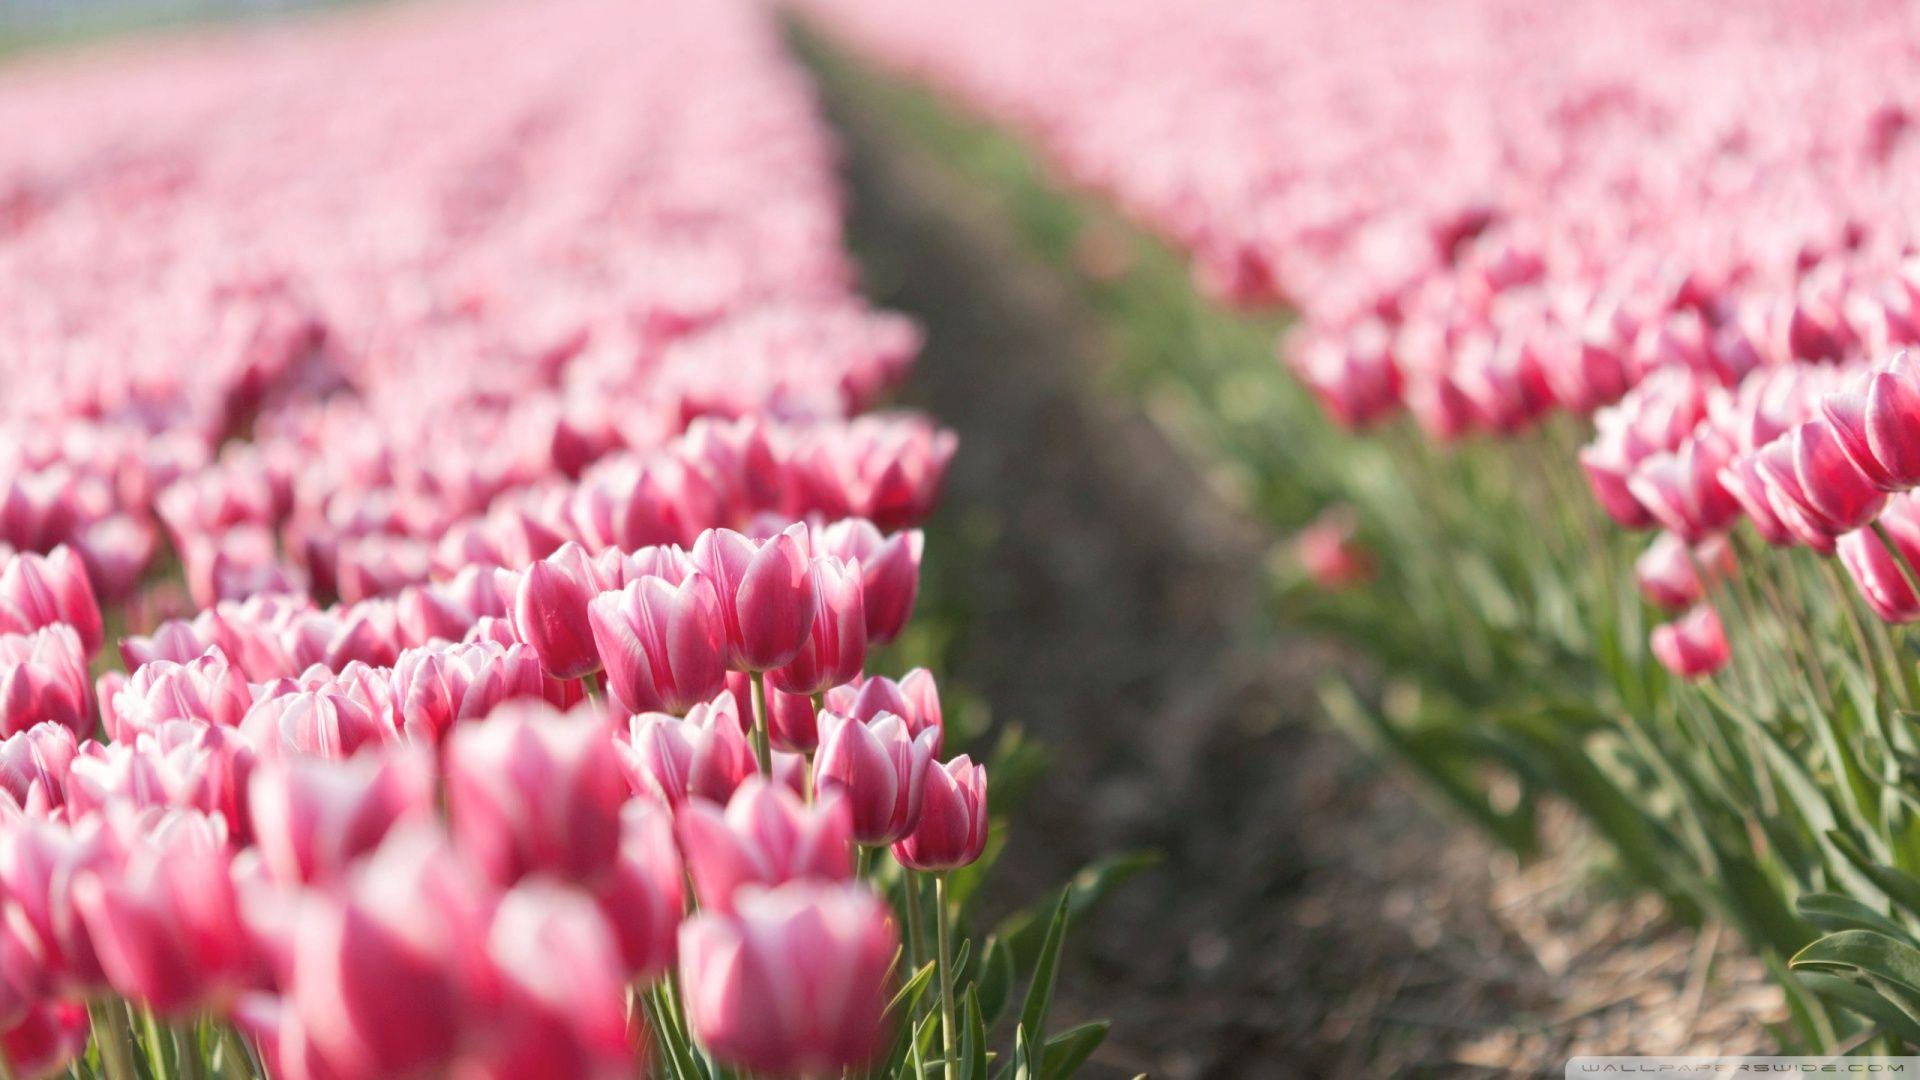 Field Of Pink Tulips HD Wallpaper, Background Image